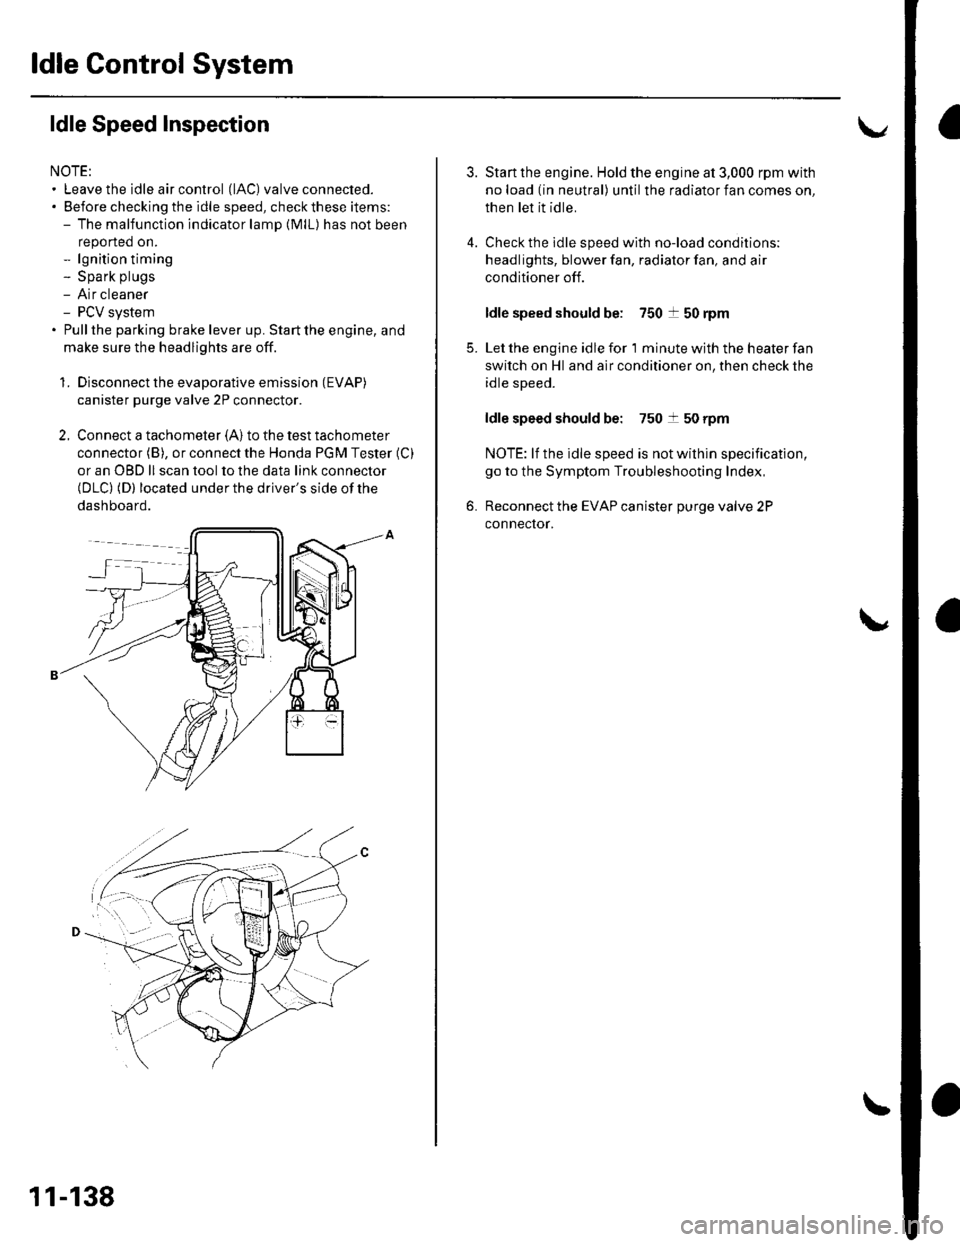 HONDA CIVIC 2003 7.G Workshop Manual ldle Control System
ldle Speed lnspection
NOTE: Leave the idle air control (lAC) valve connecled.. Before checking the idle speed, check these items:- The malfunction indicator lamp (MlL) has not bee